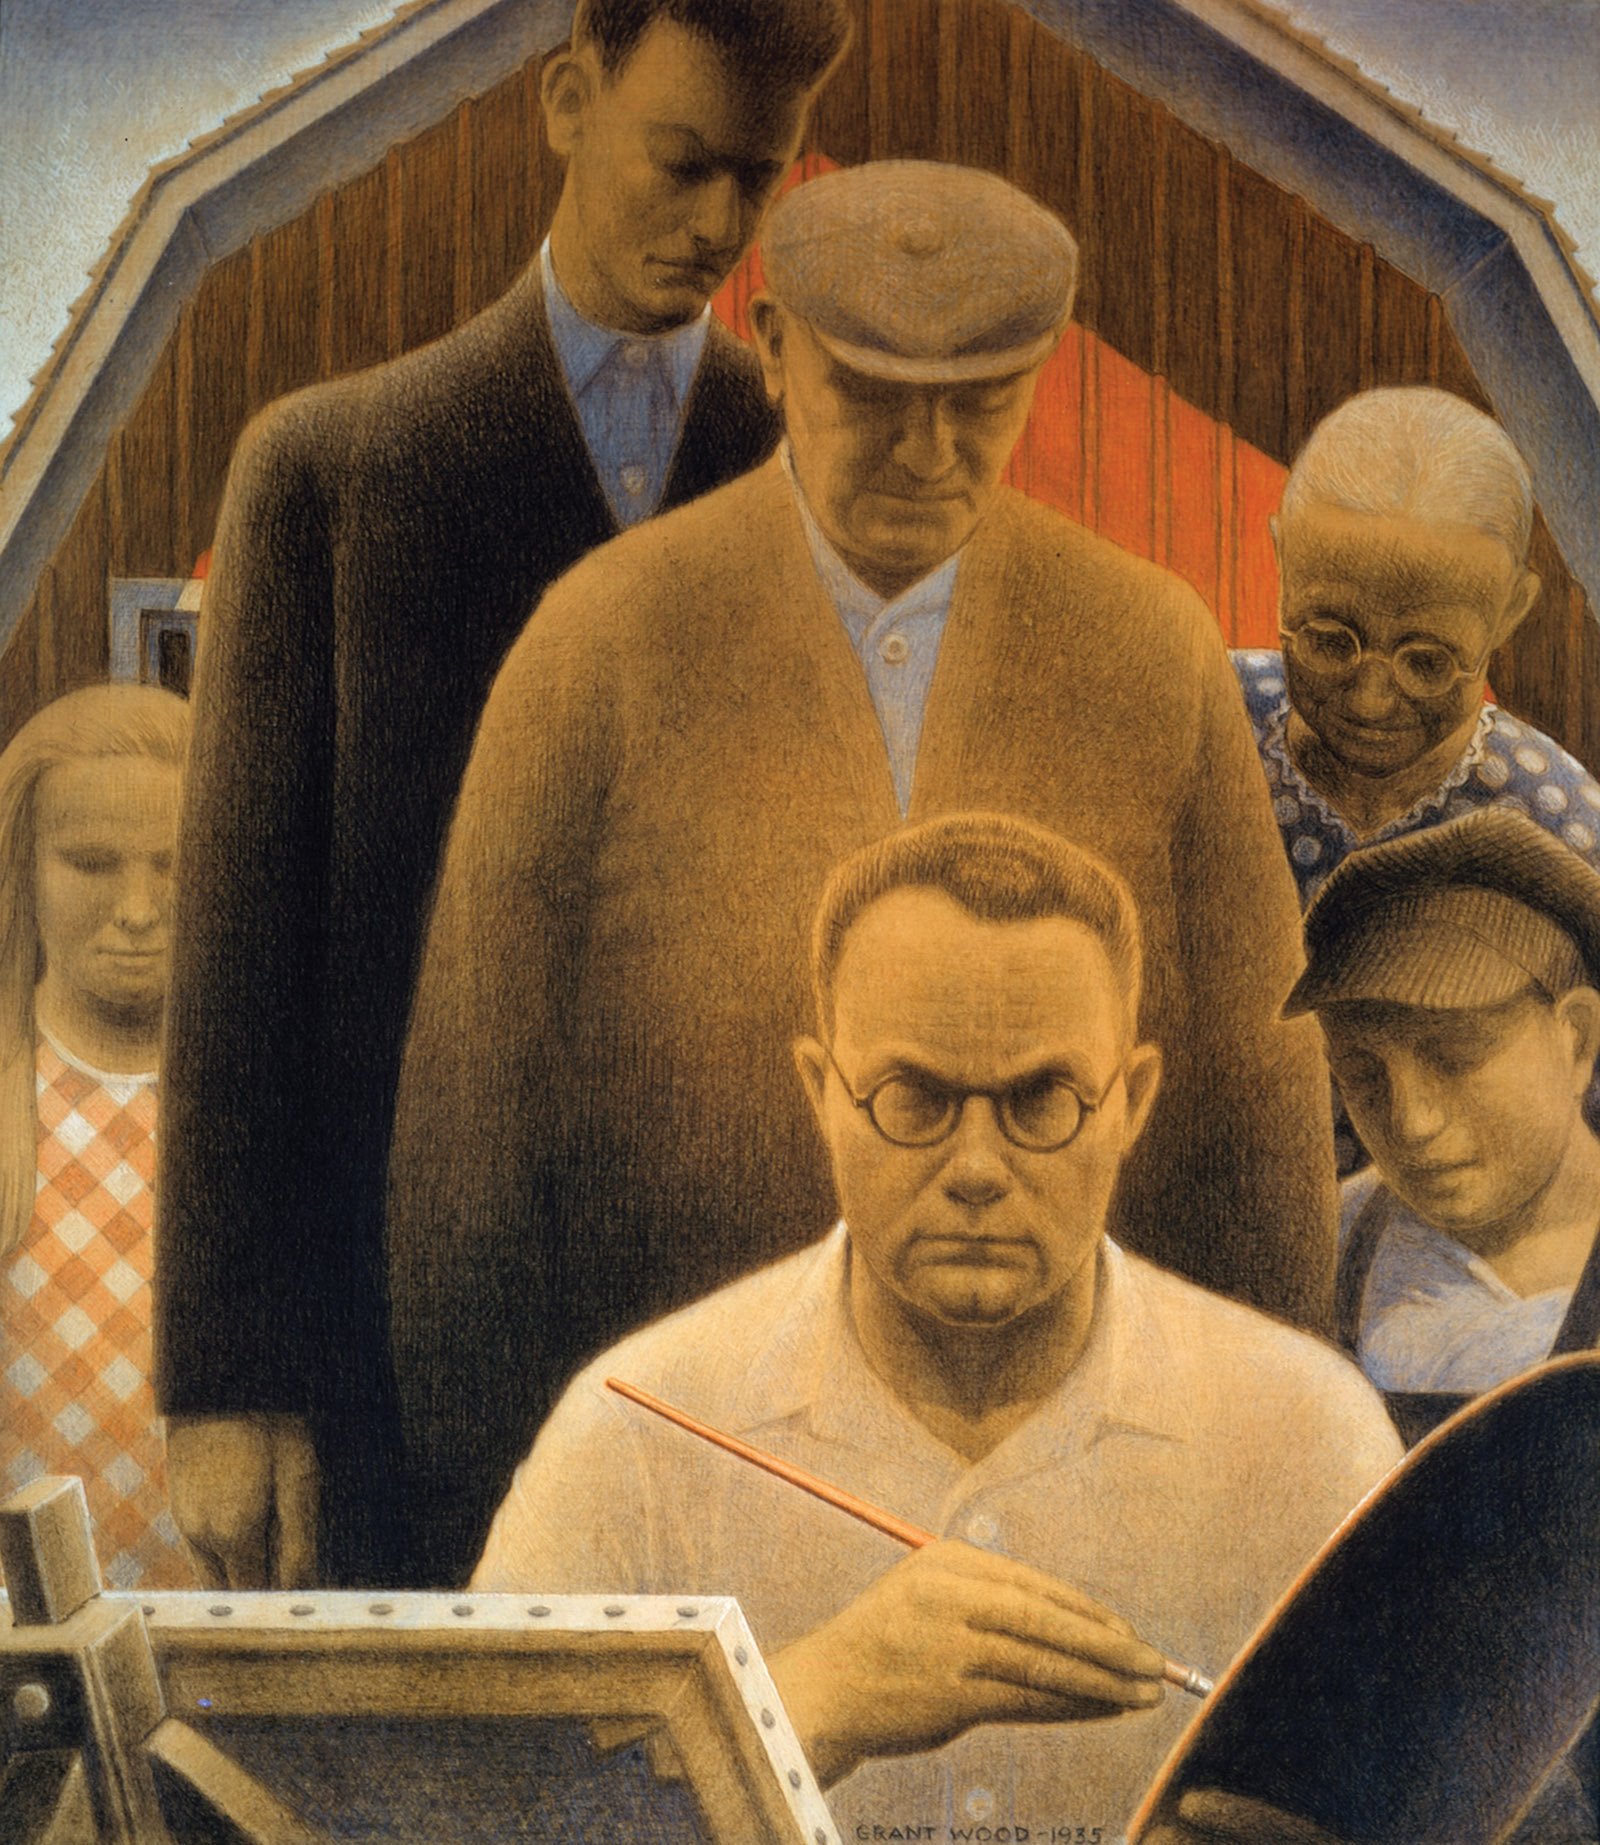 This painting showcases Grant Wood as its central figure, his gaze directed straight at the viewer, his expression grave. The clean-shaven artist appears to be at work, encircled by individuals dressed in farmer's attire or as common townsfolk, adding a touch of rural Americana. The surrounding characters sport somber, expressionless faces, their lowered gazes possibly conveying disinterest or disappointment, markedly contrasting Wood's direct stare. They all seem to be inside a barn, inferred from the Gothic arch figure and the distinctive arched window visible behind them. The painting employs a muted, earthy palette of browns, grays, and oranges, further enhancing its rustic atmosphere.